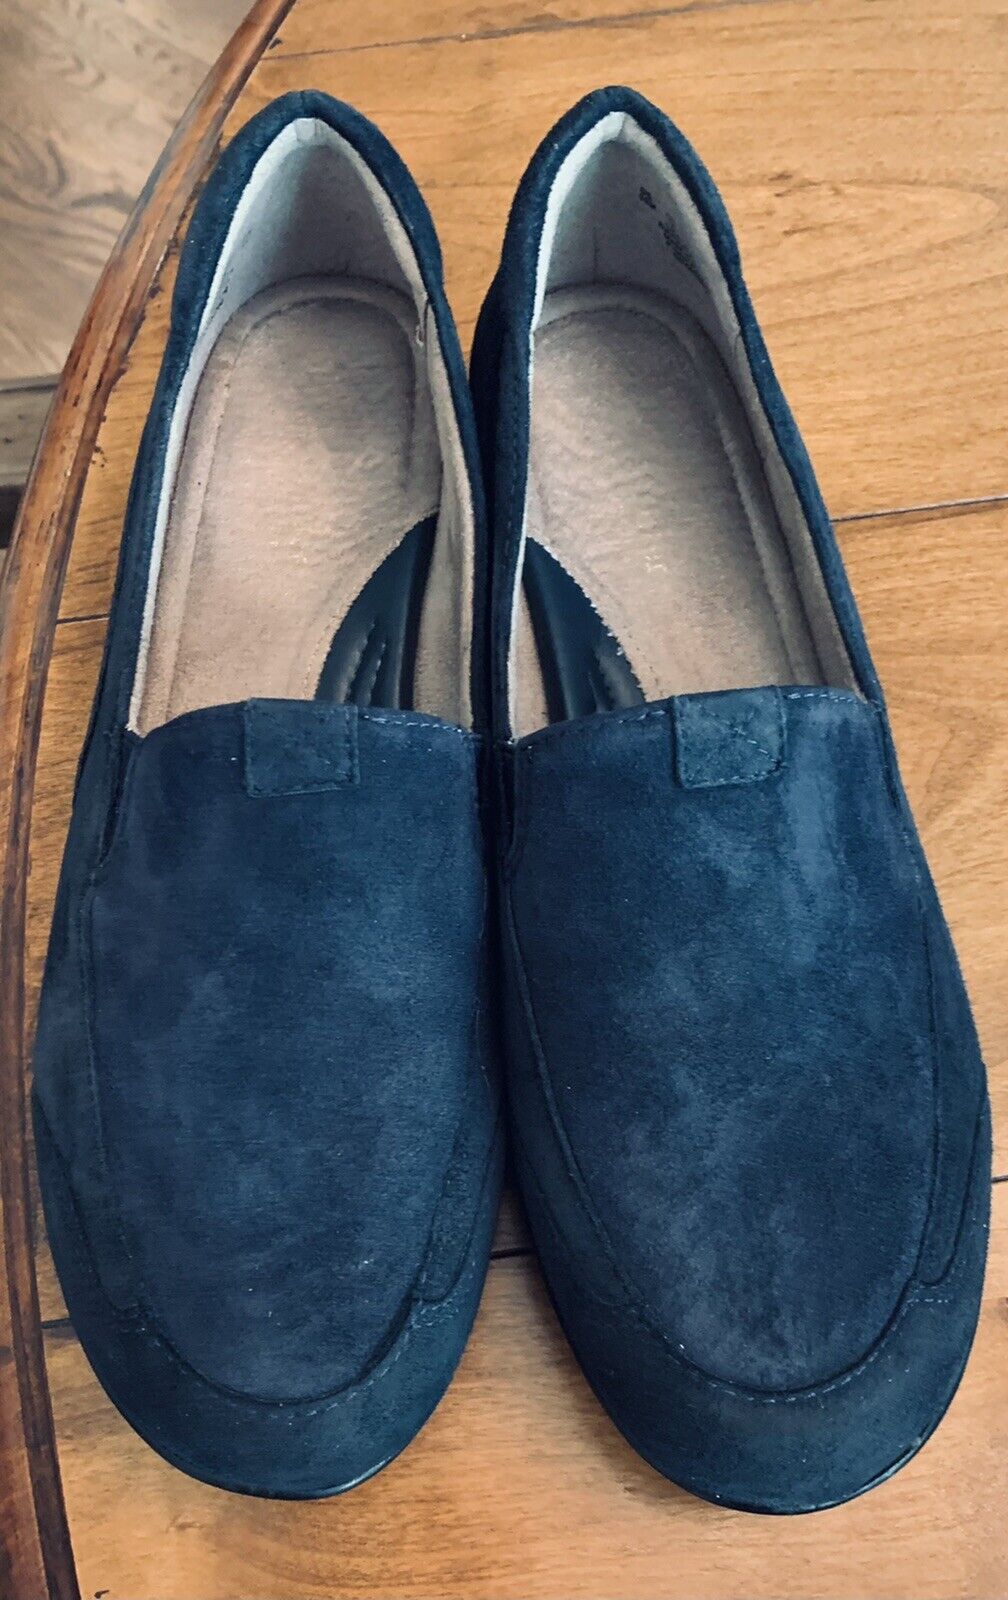 Naturalizers Ladies Slip-on Navy Suede Leather Upper Loafer Walking Shoe Sz 10m